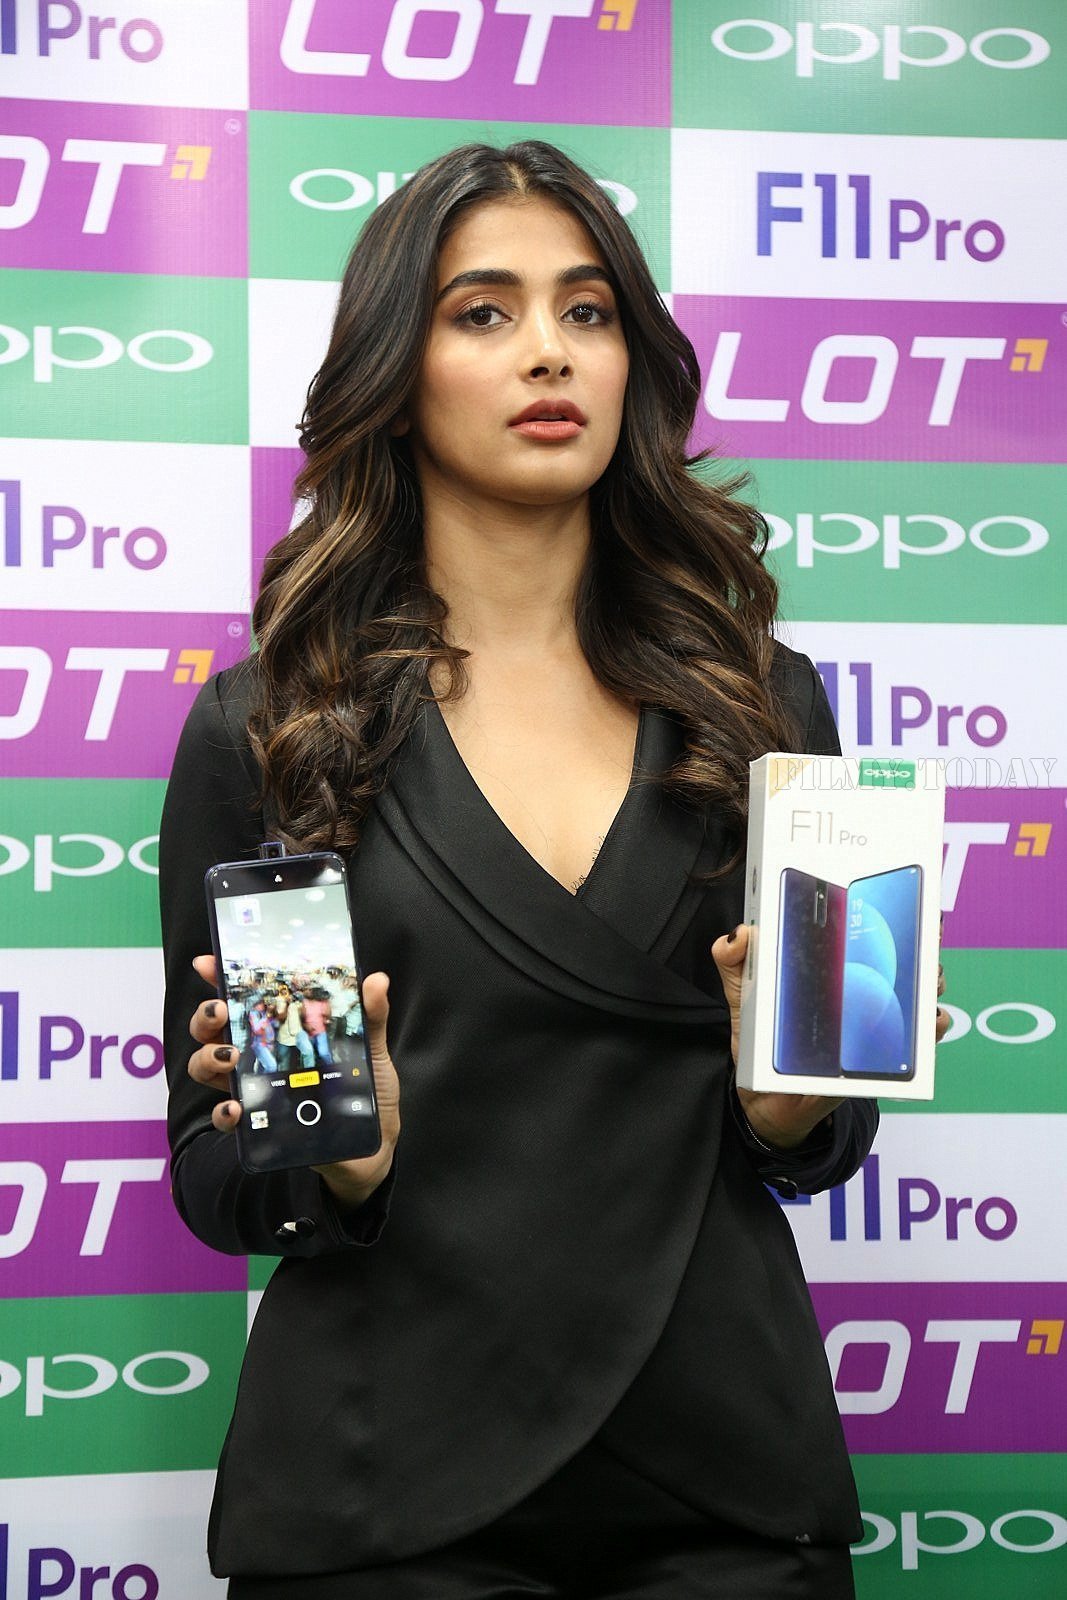 Photos: Pooja Hegde Launched Oppo F11 Pro Mobile At LOT Mobiles | Picture 1635918